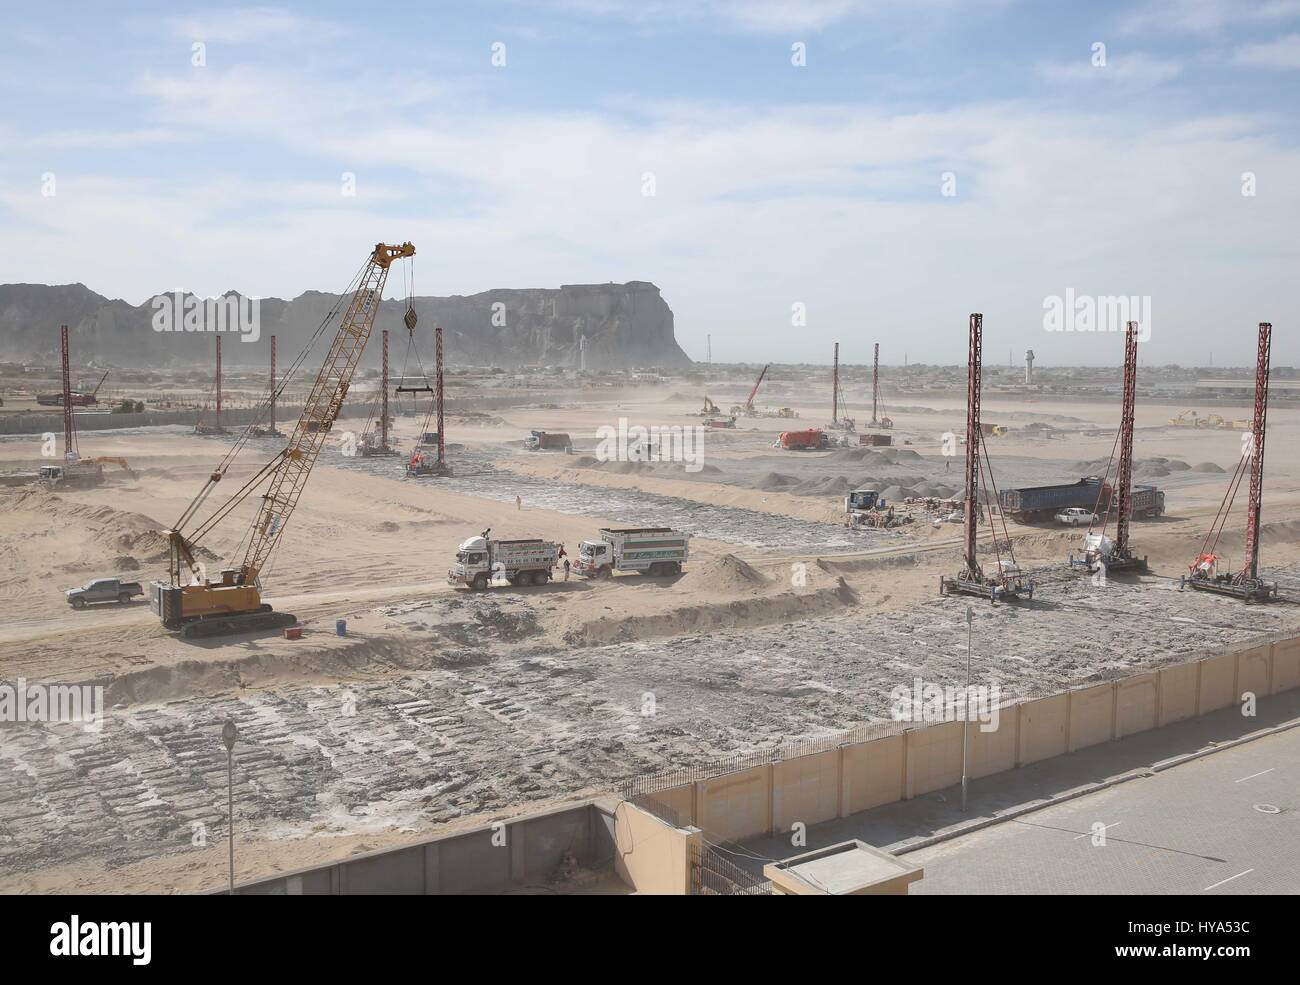 (170403) -- GWADAR(PAKISTAN), April 3, 2017 (Xinhua) -- Photo taken on March 22, 2017 shows a free zone in construction of the Gwadar port in Gwadar, Pakistan. Gwadar, a poorly-known port town previously in Pakistan has been becoming a new economic engine for the country with the construction of a free zone co-built with China. (Xinhua/Liu Tian) (sxk) Stock Photo